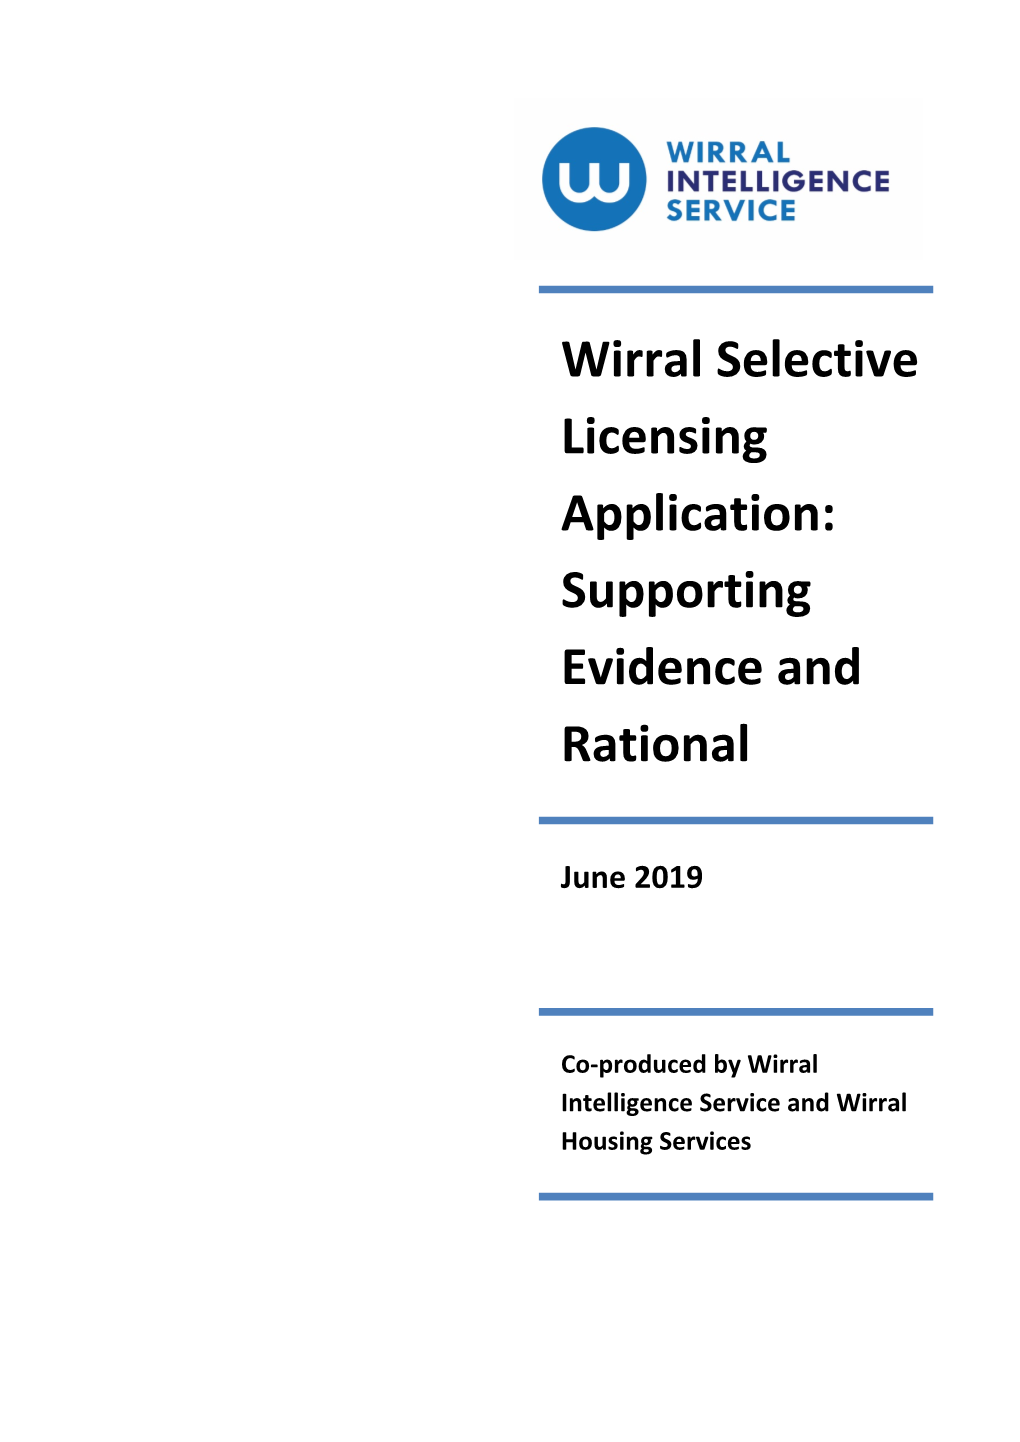 Wirral Selective Licensing Application: Supporting Evidence and Rational